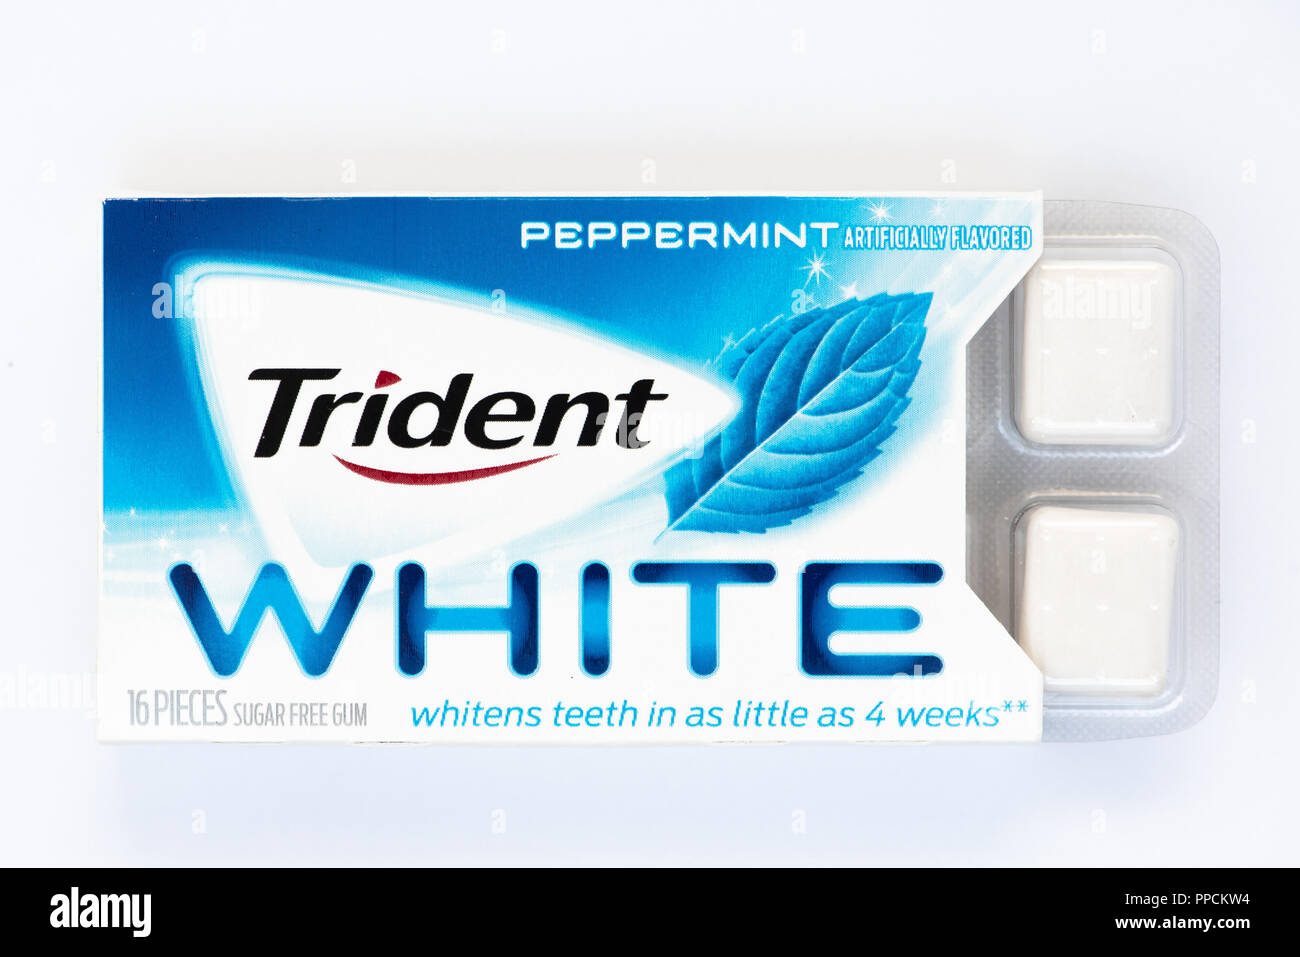 A package of peppermint Trident White sugar free chewing gum claiming to whiten teeth in as little as 4 weeks. Stock Photo